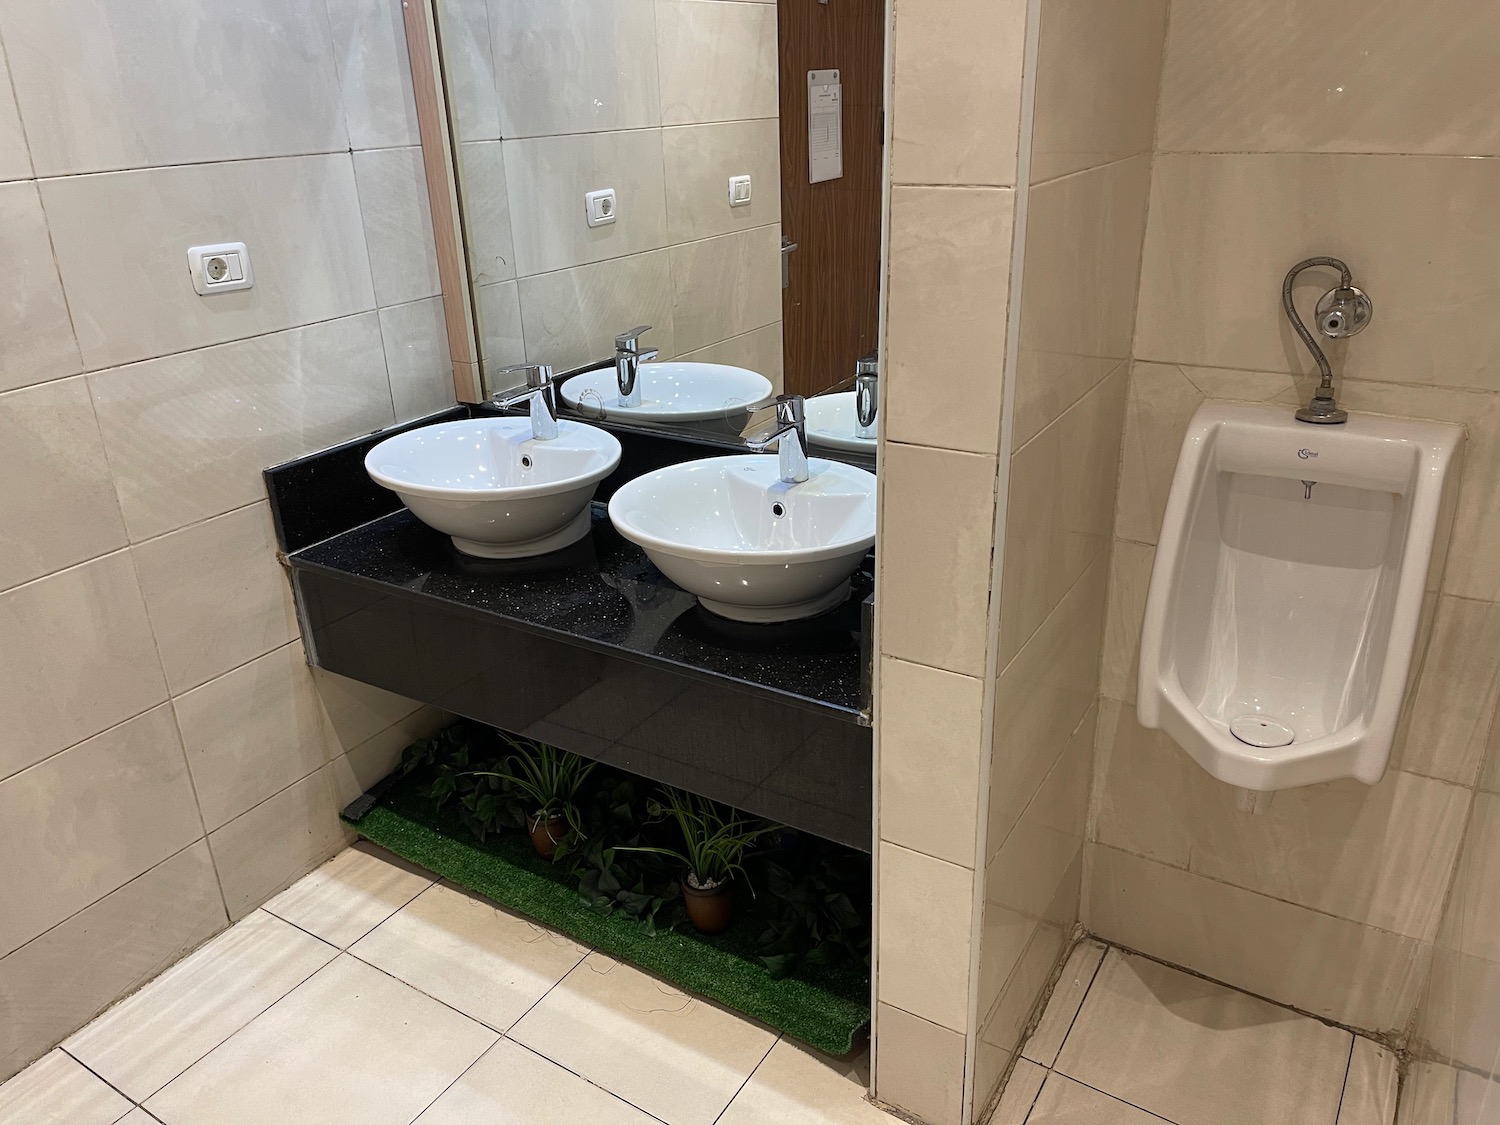 a bathroom with sinks and urinal